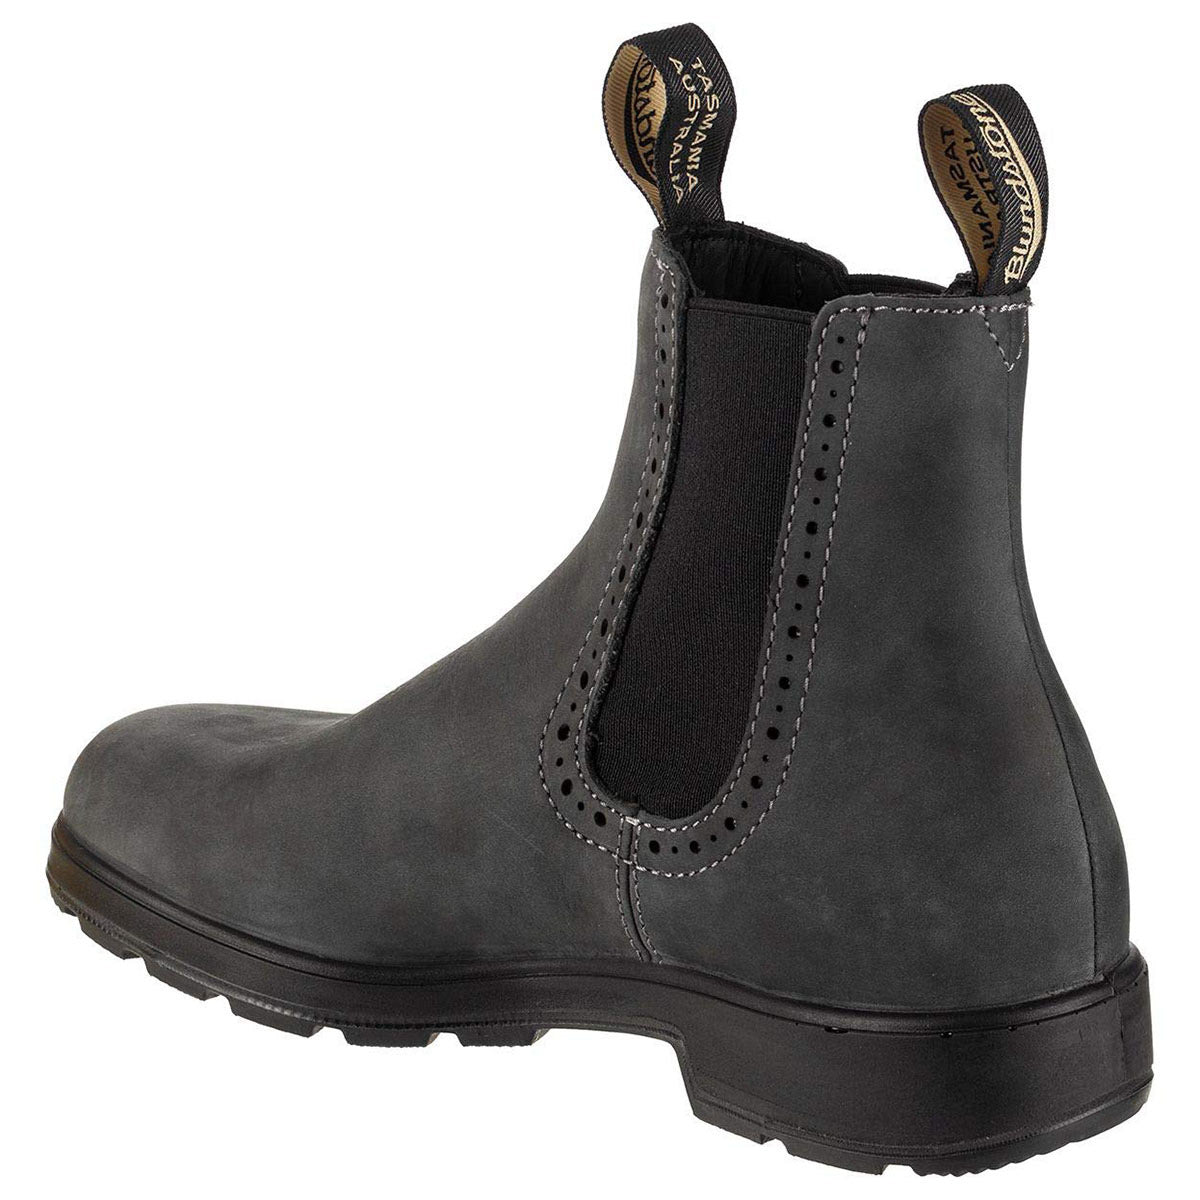 Blundstone BLUNDSTONE 1630 HIGH TOP RUSTIC BLACK - WOMENS Chelsea boot on a white background.